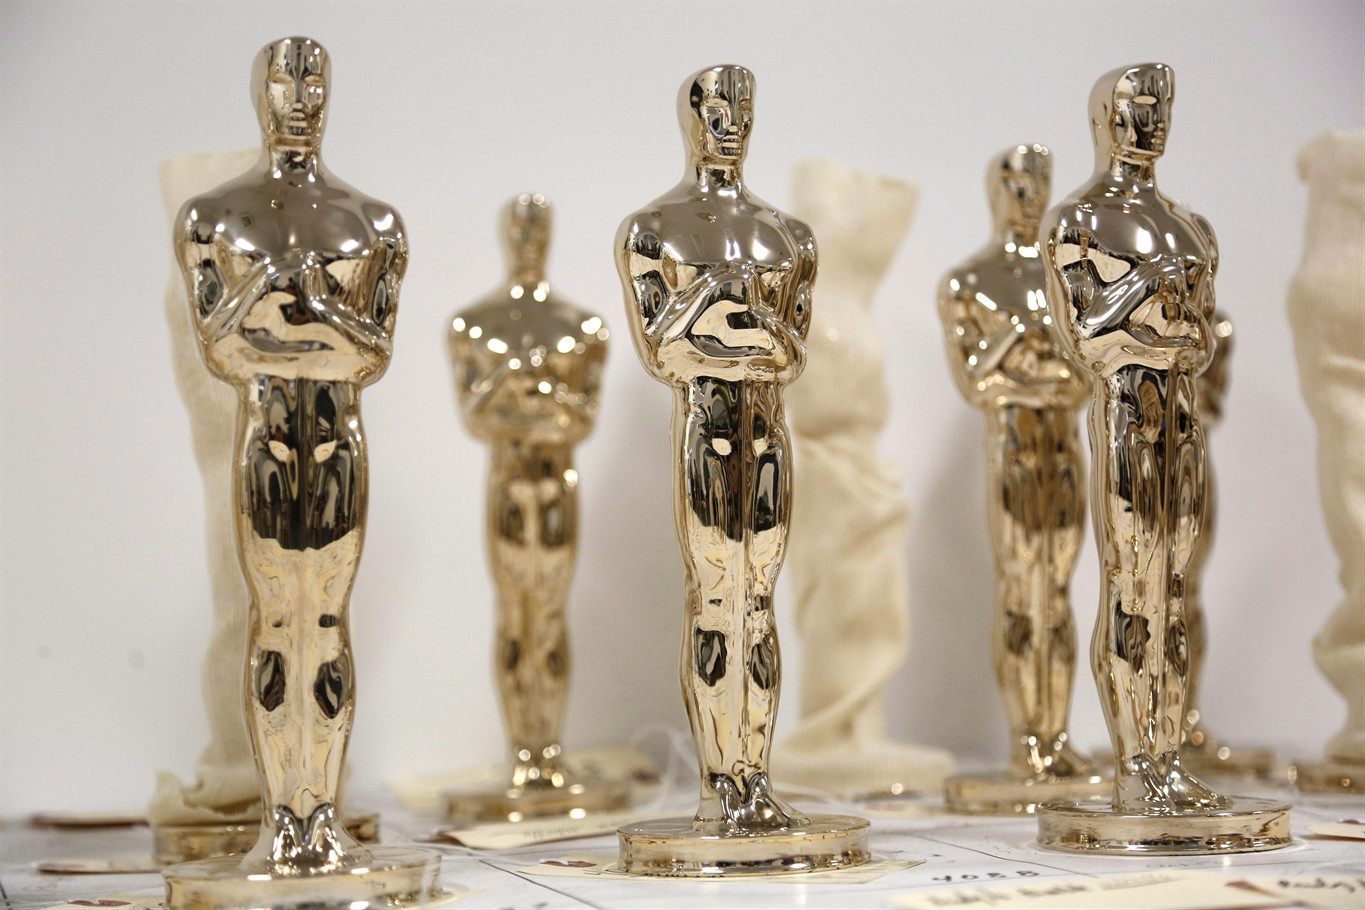 What are some interesting facts about Oscar statues?